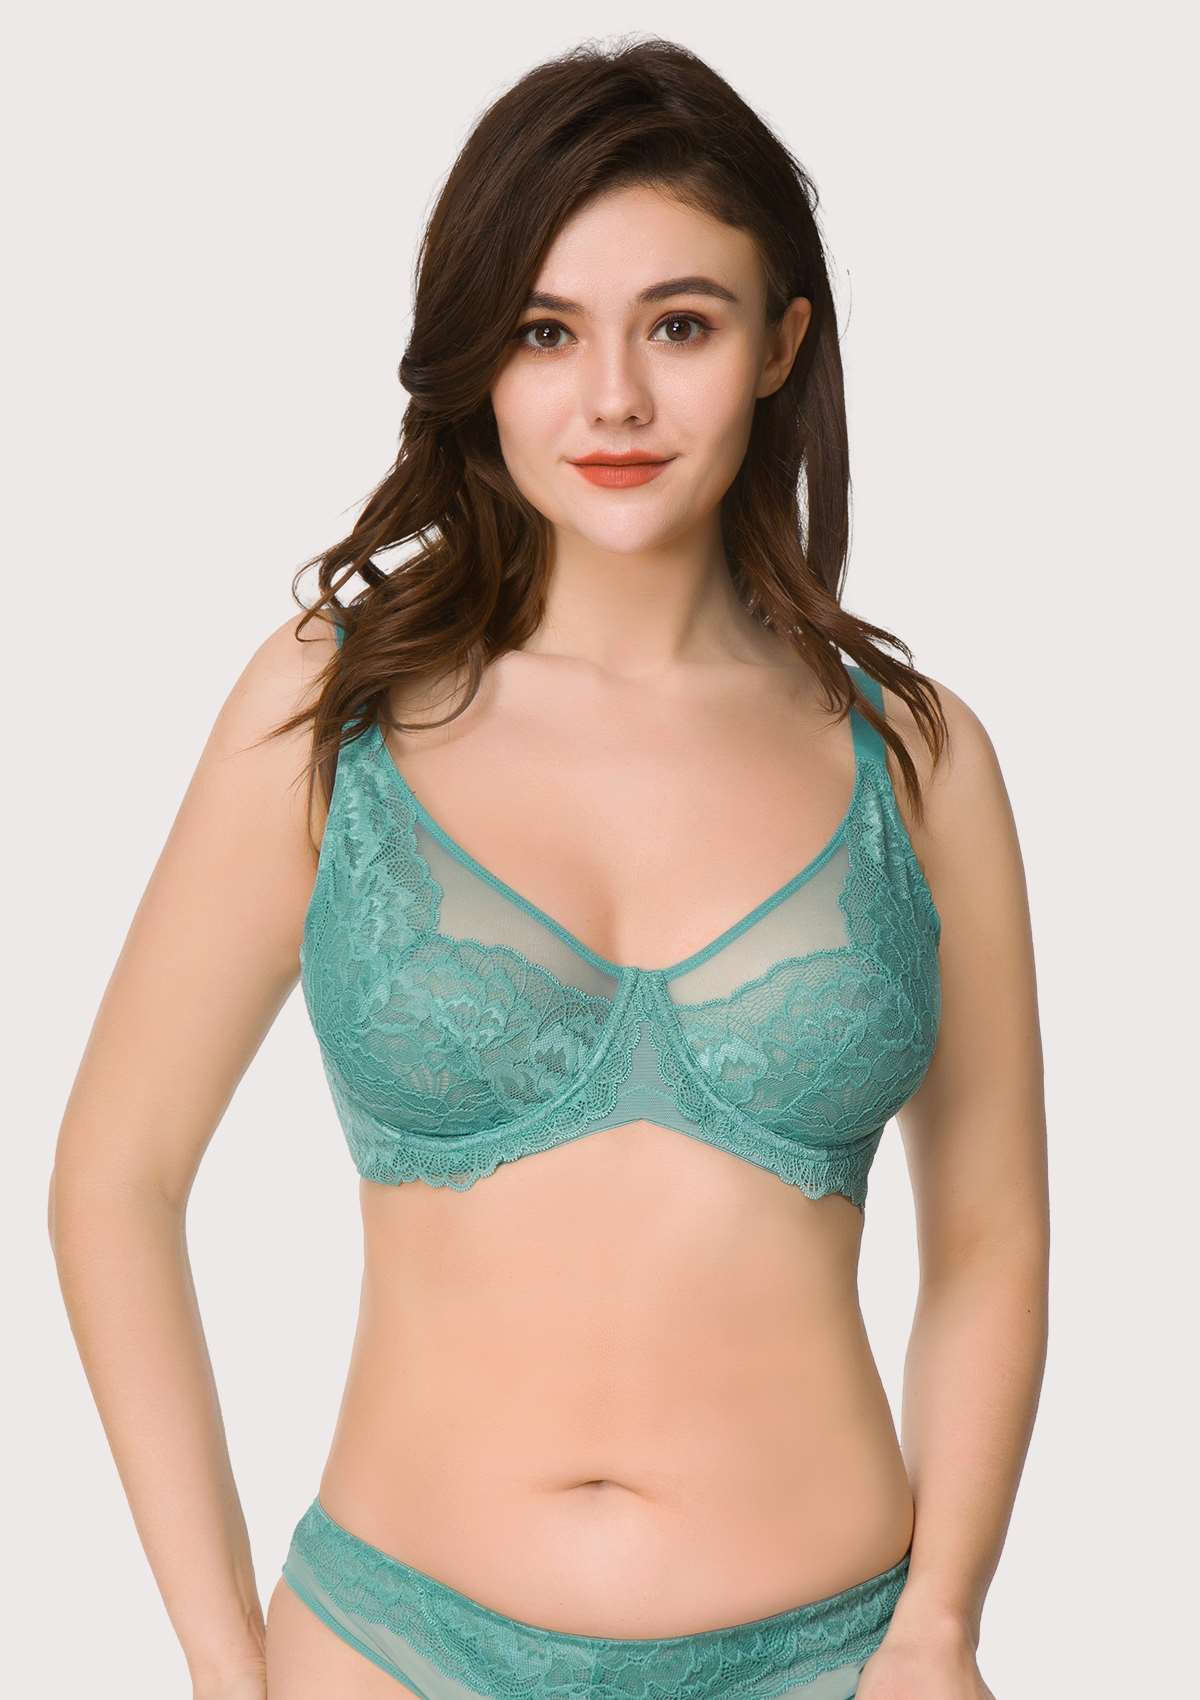 HSIA Peony Lace Unlined Supportive Underwire Bra - Light Coral / 42 / DDD/F